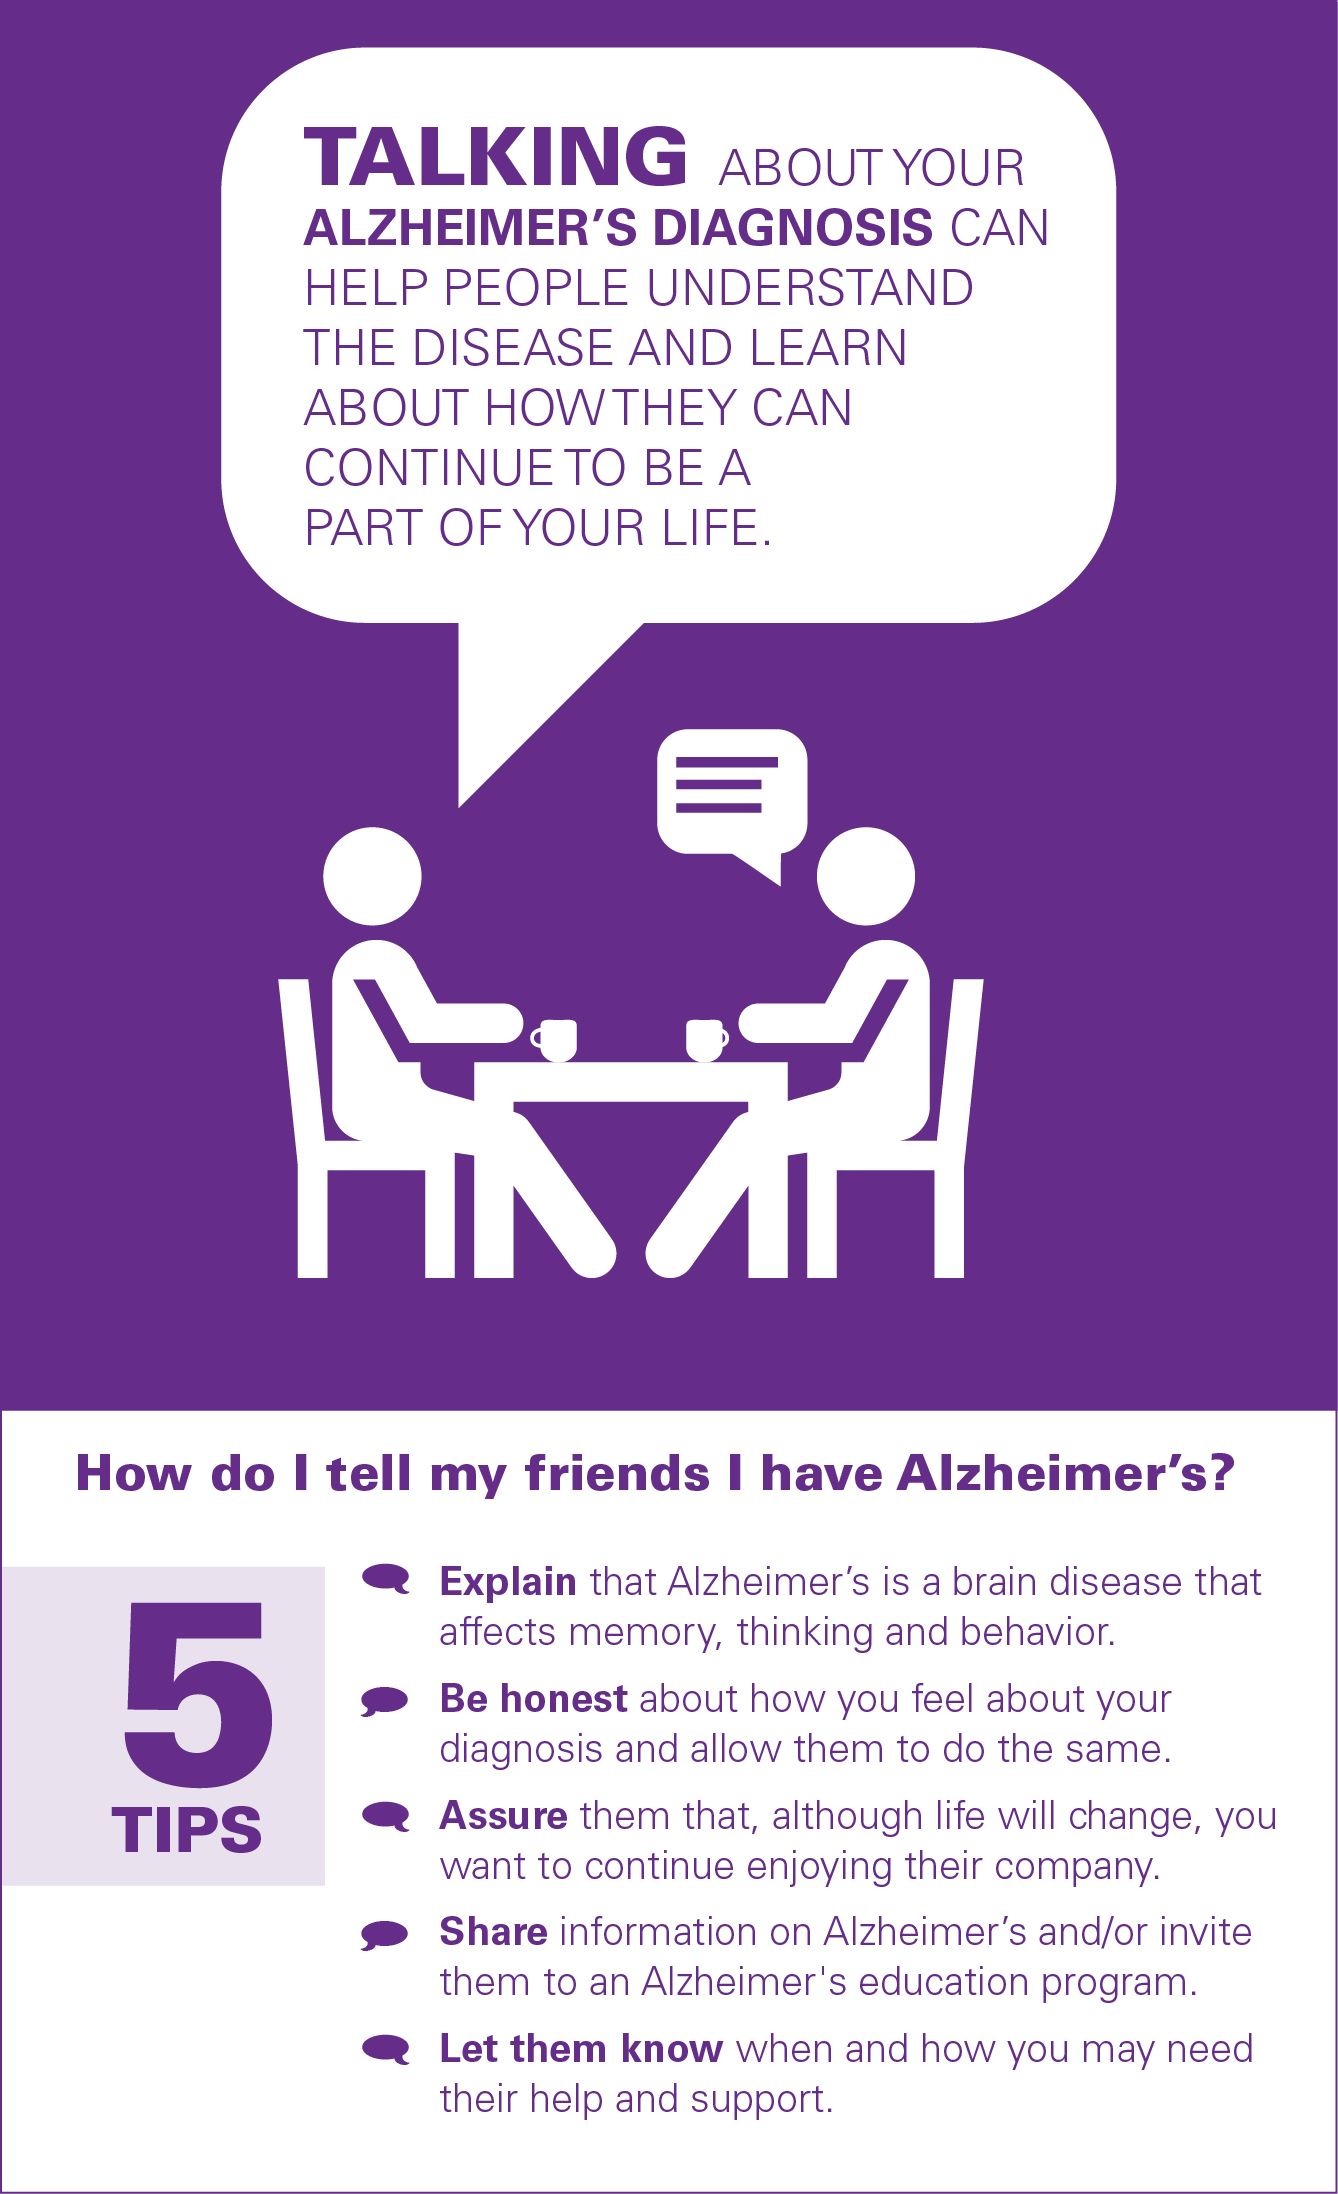 Talking about your Alzheimer